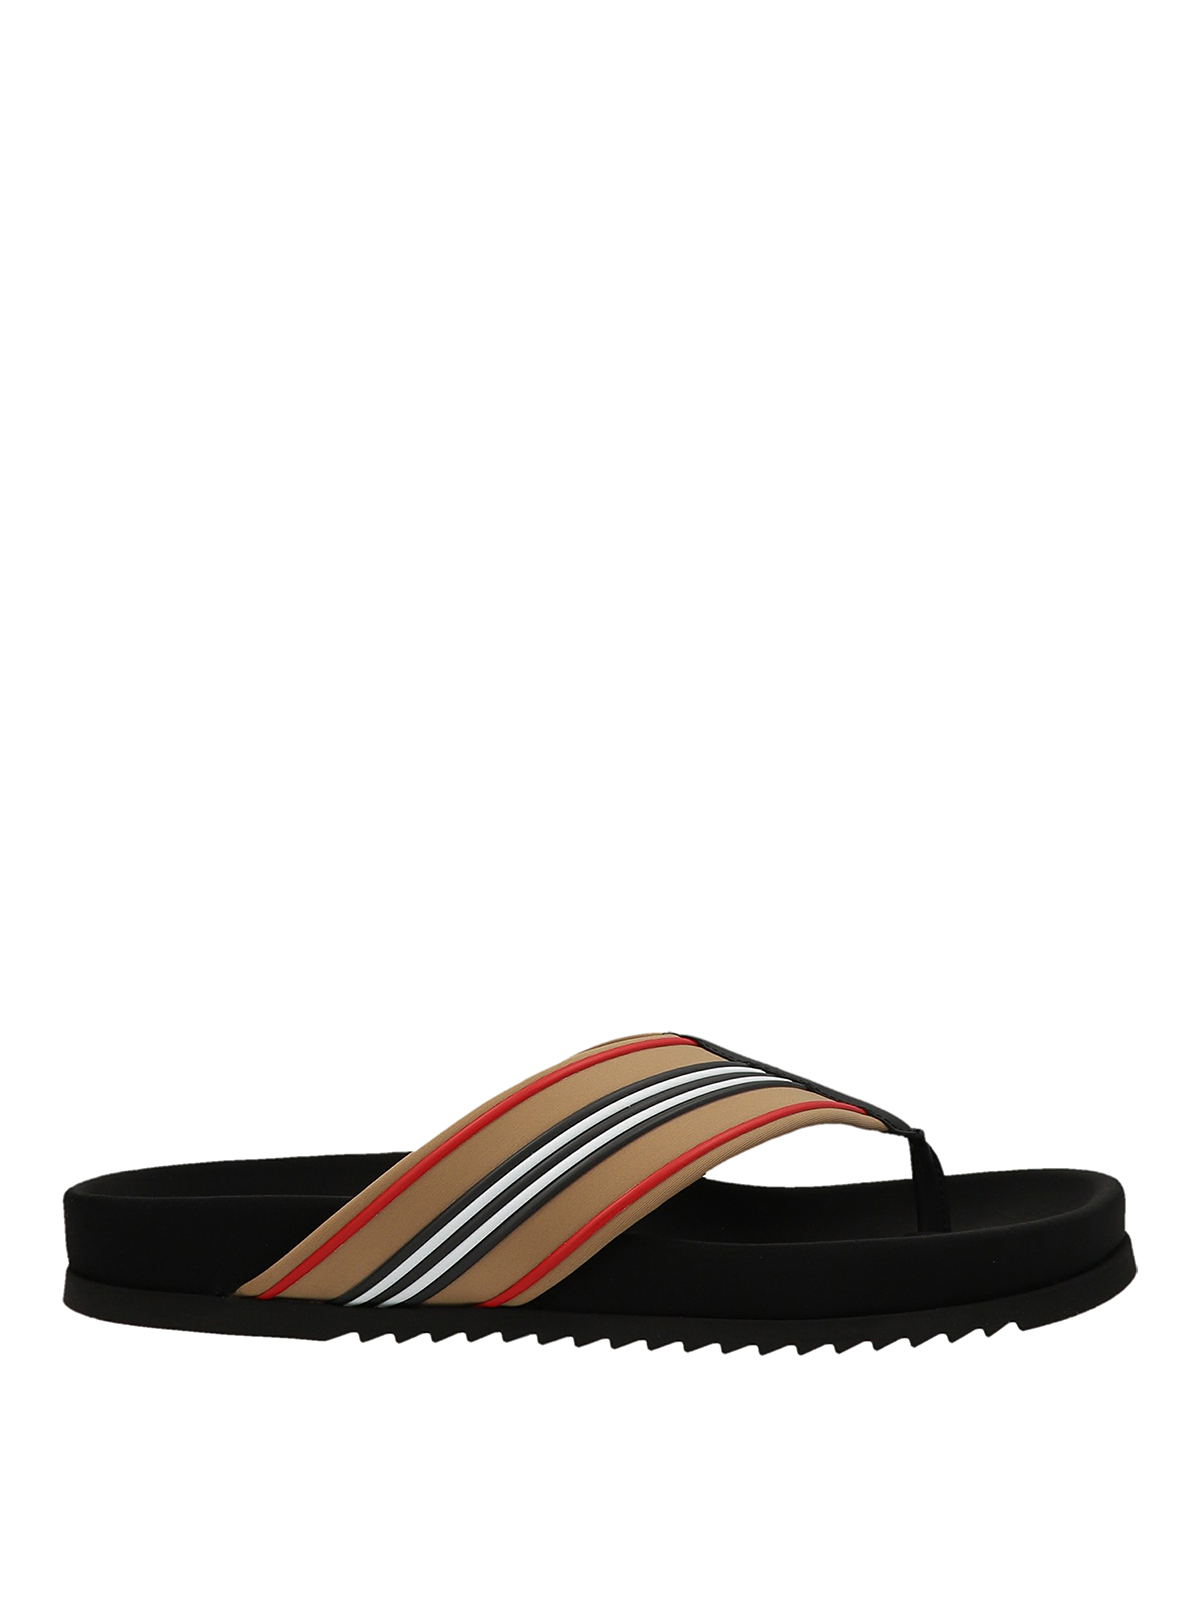 Burberry Clintonville Thong Sandals In Multicolour